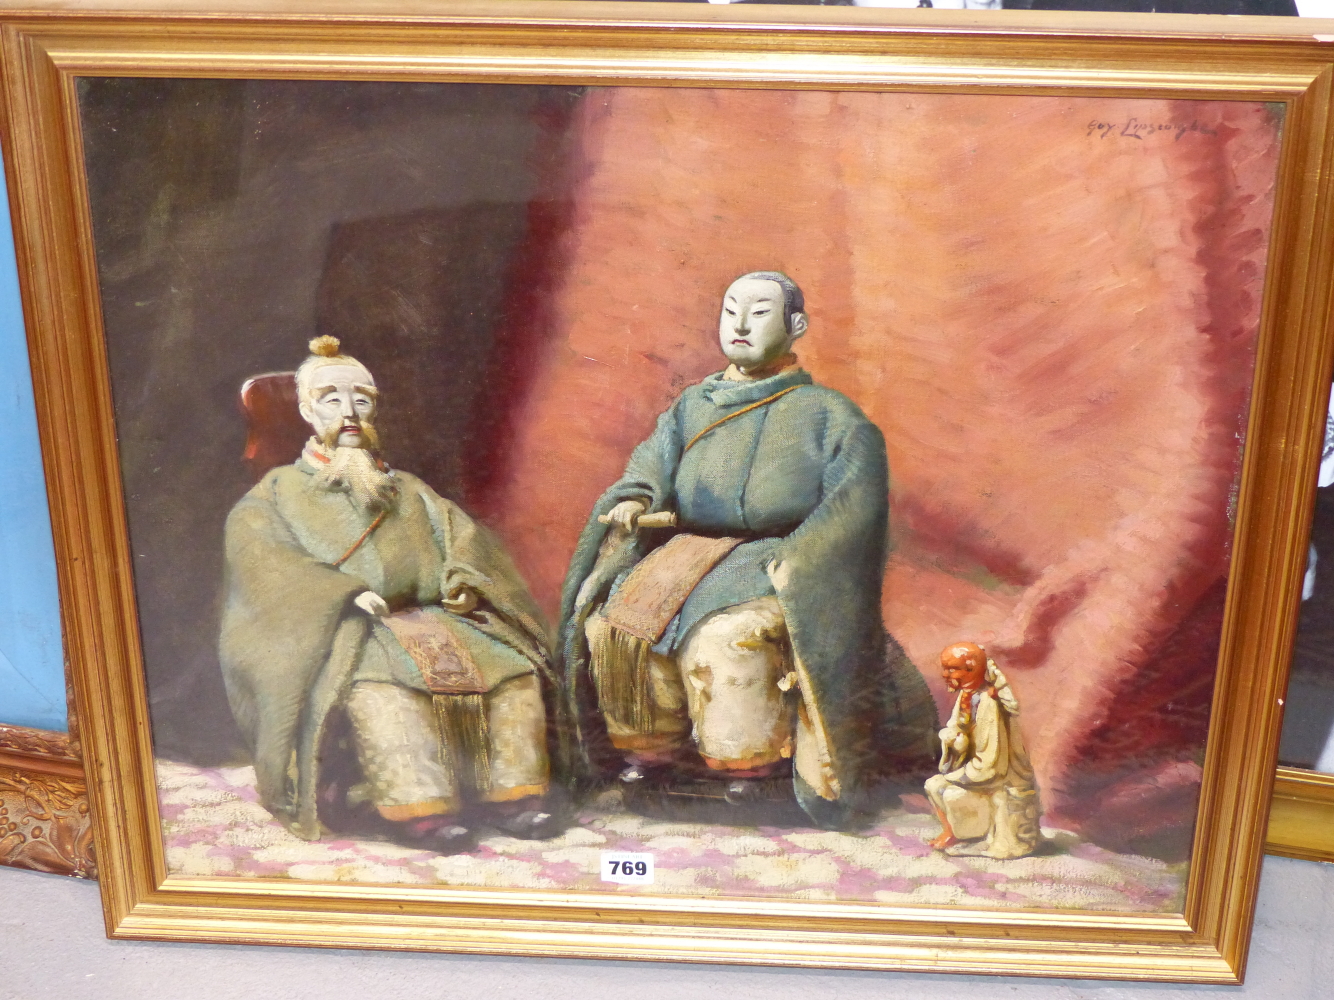 GUY LIPSCOMBE (1881-1952), JAPANESE DOLLS, A PAIR OF OILS ON CANVAS, SIGNED AND INSCRIBED VERSO. - Image 2 of 5